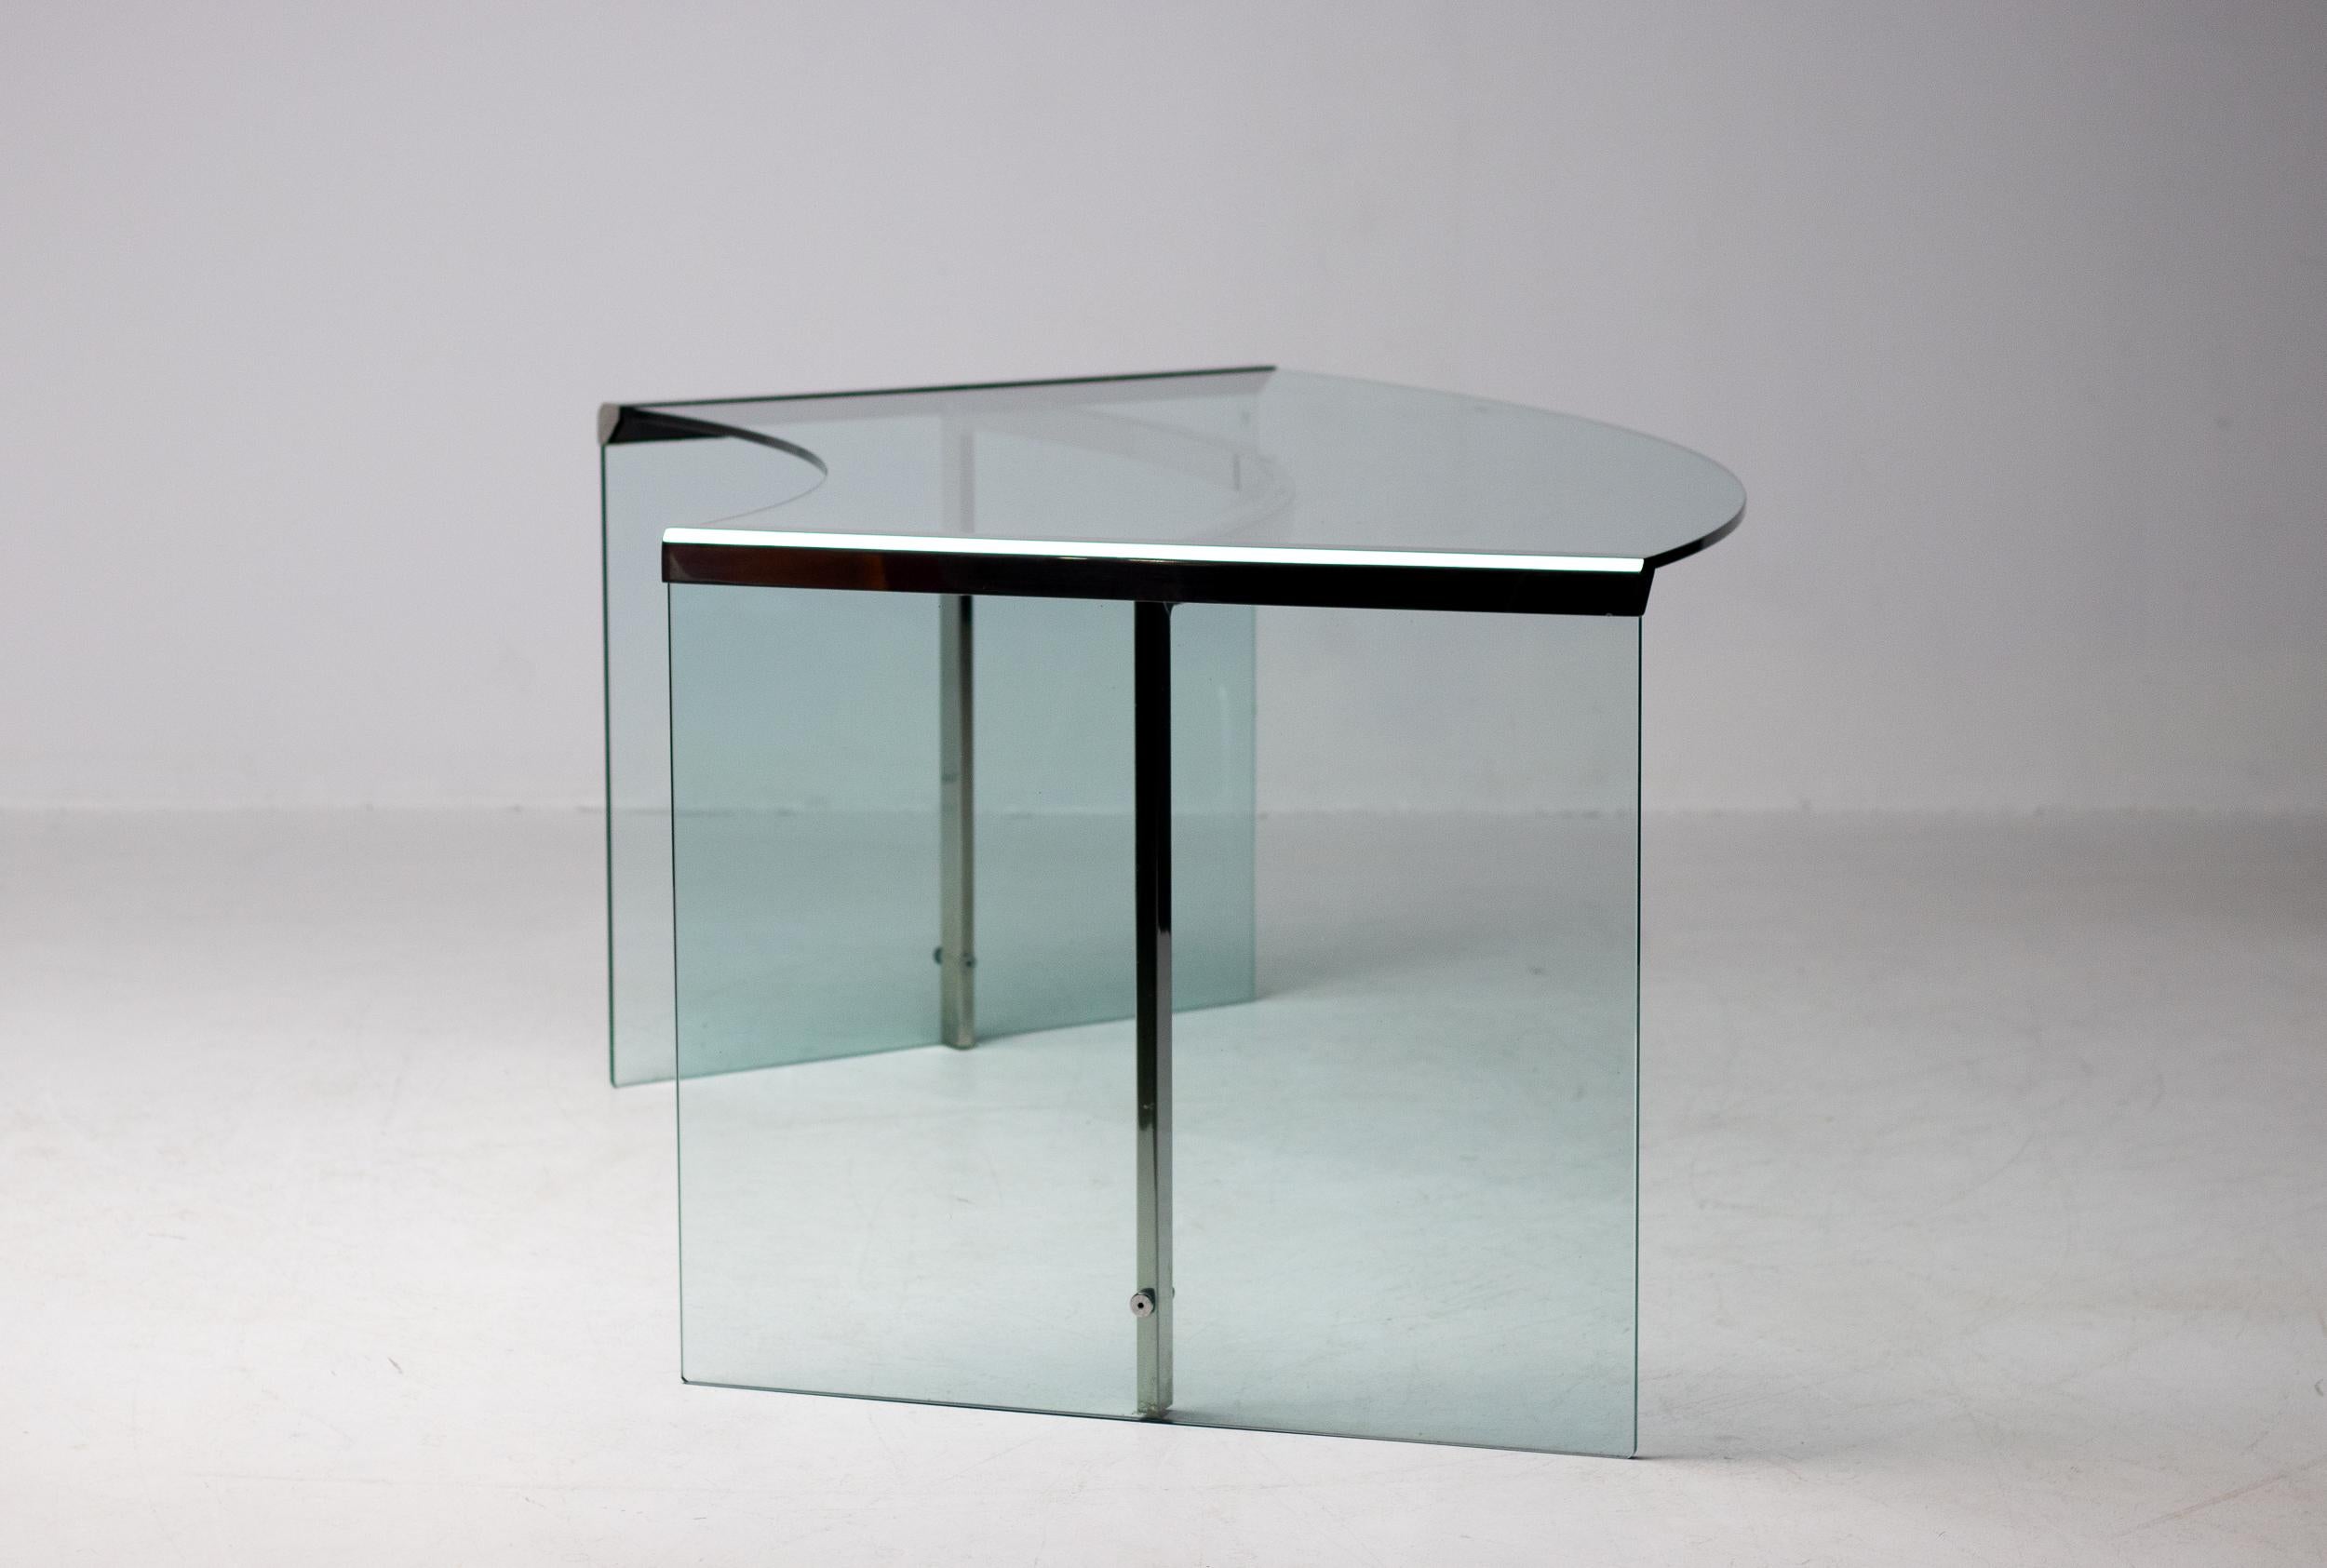 President Desk made of safety glass with a stainless steel frame. 
Originally designed by Gallotti & Radice in 1971, this piece is made circa 1988.
Marked with label.

Gallotti & Radice is a renowned Italian furniture and design company that has